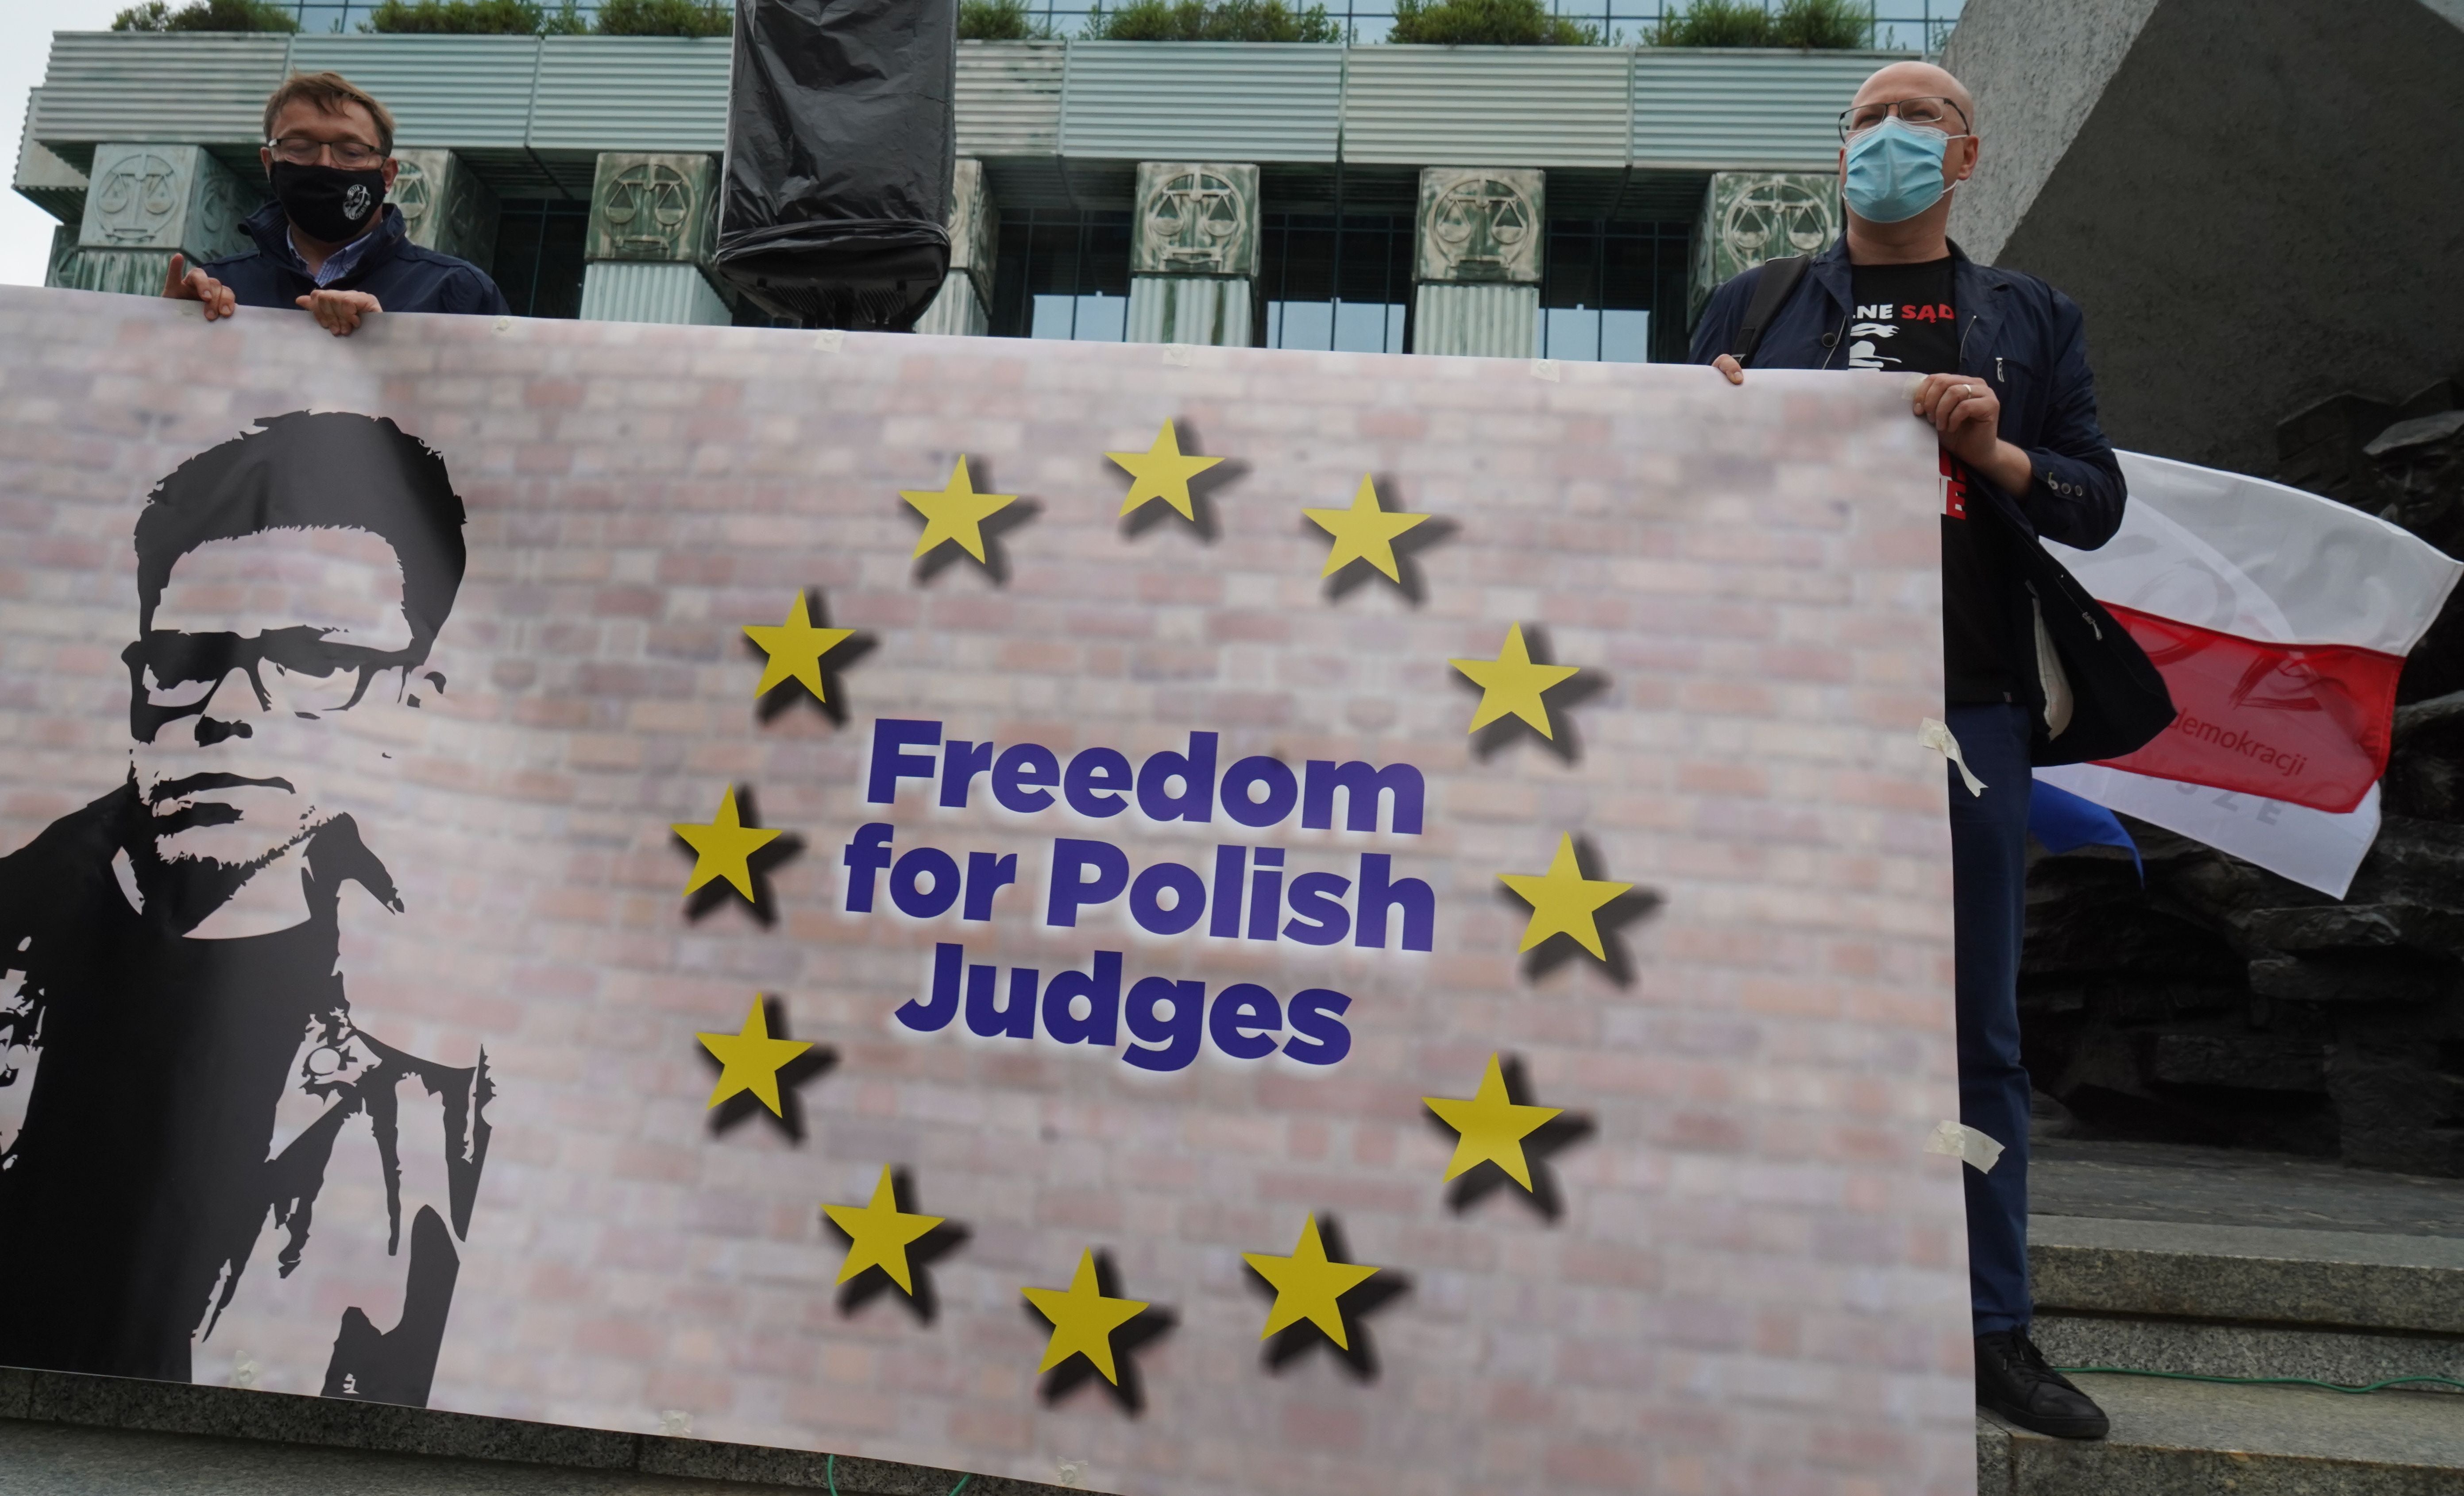 Hundreds of Poles rallied nationwide in 2020 in support of a judge critical of government judicial reforms